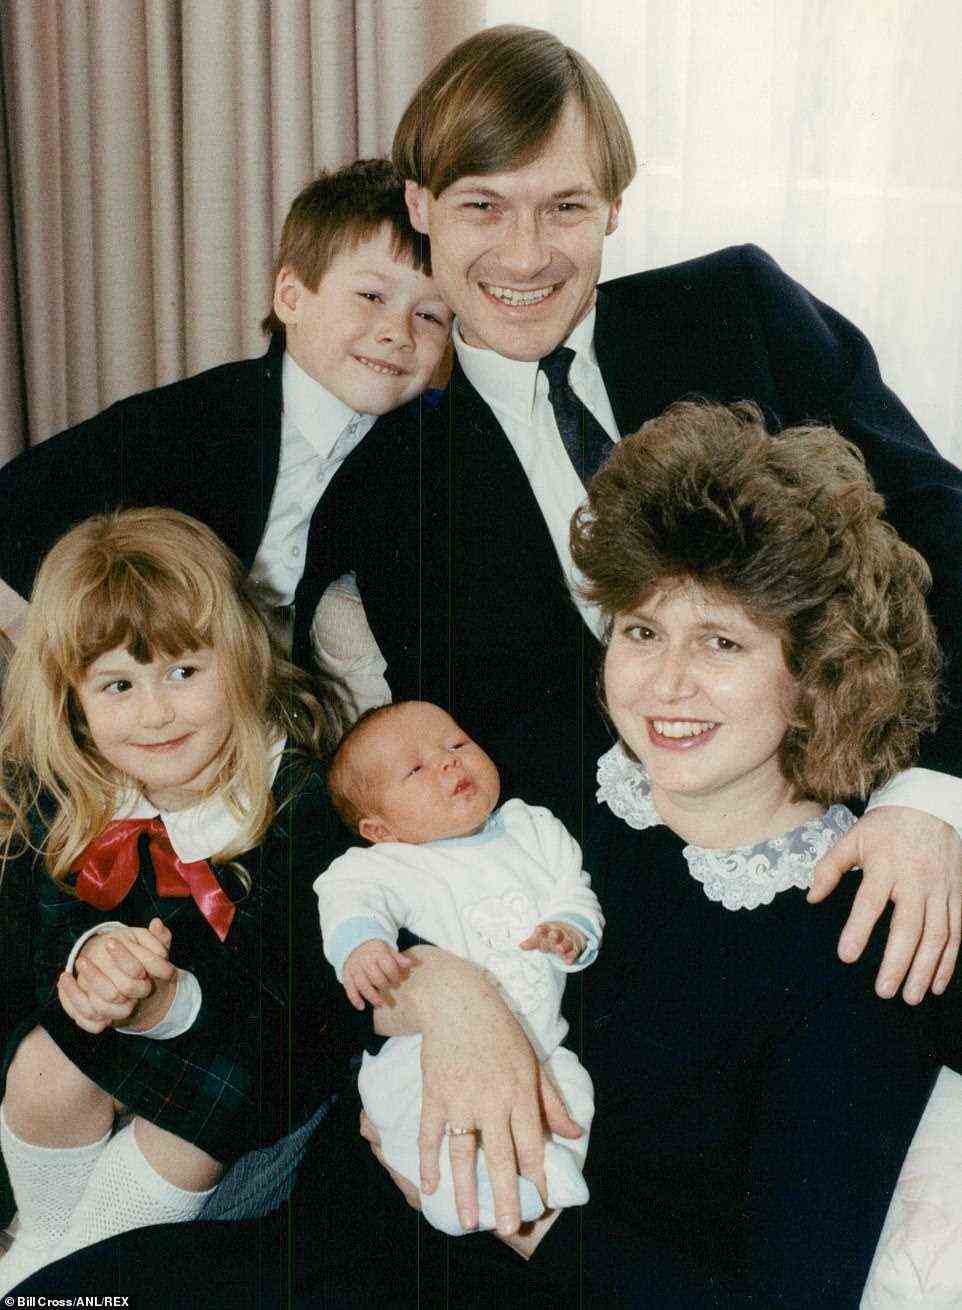 Family man: David beams proudly with his son, also David, and daughter Katie while wife Julia cradles baby Alexandra in 1990